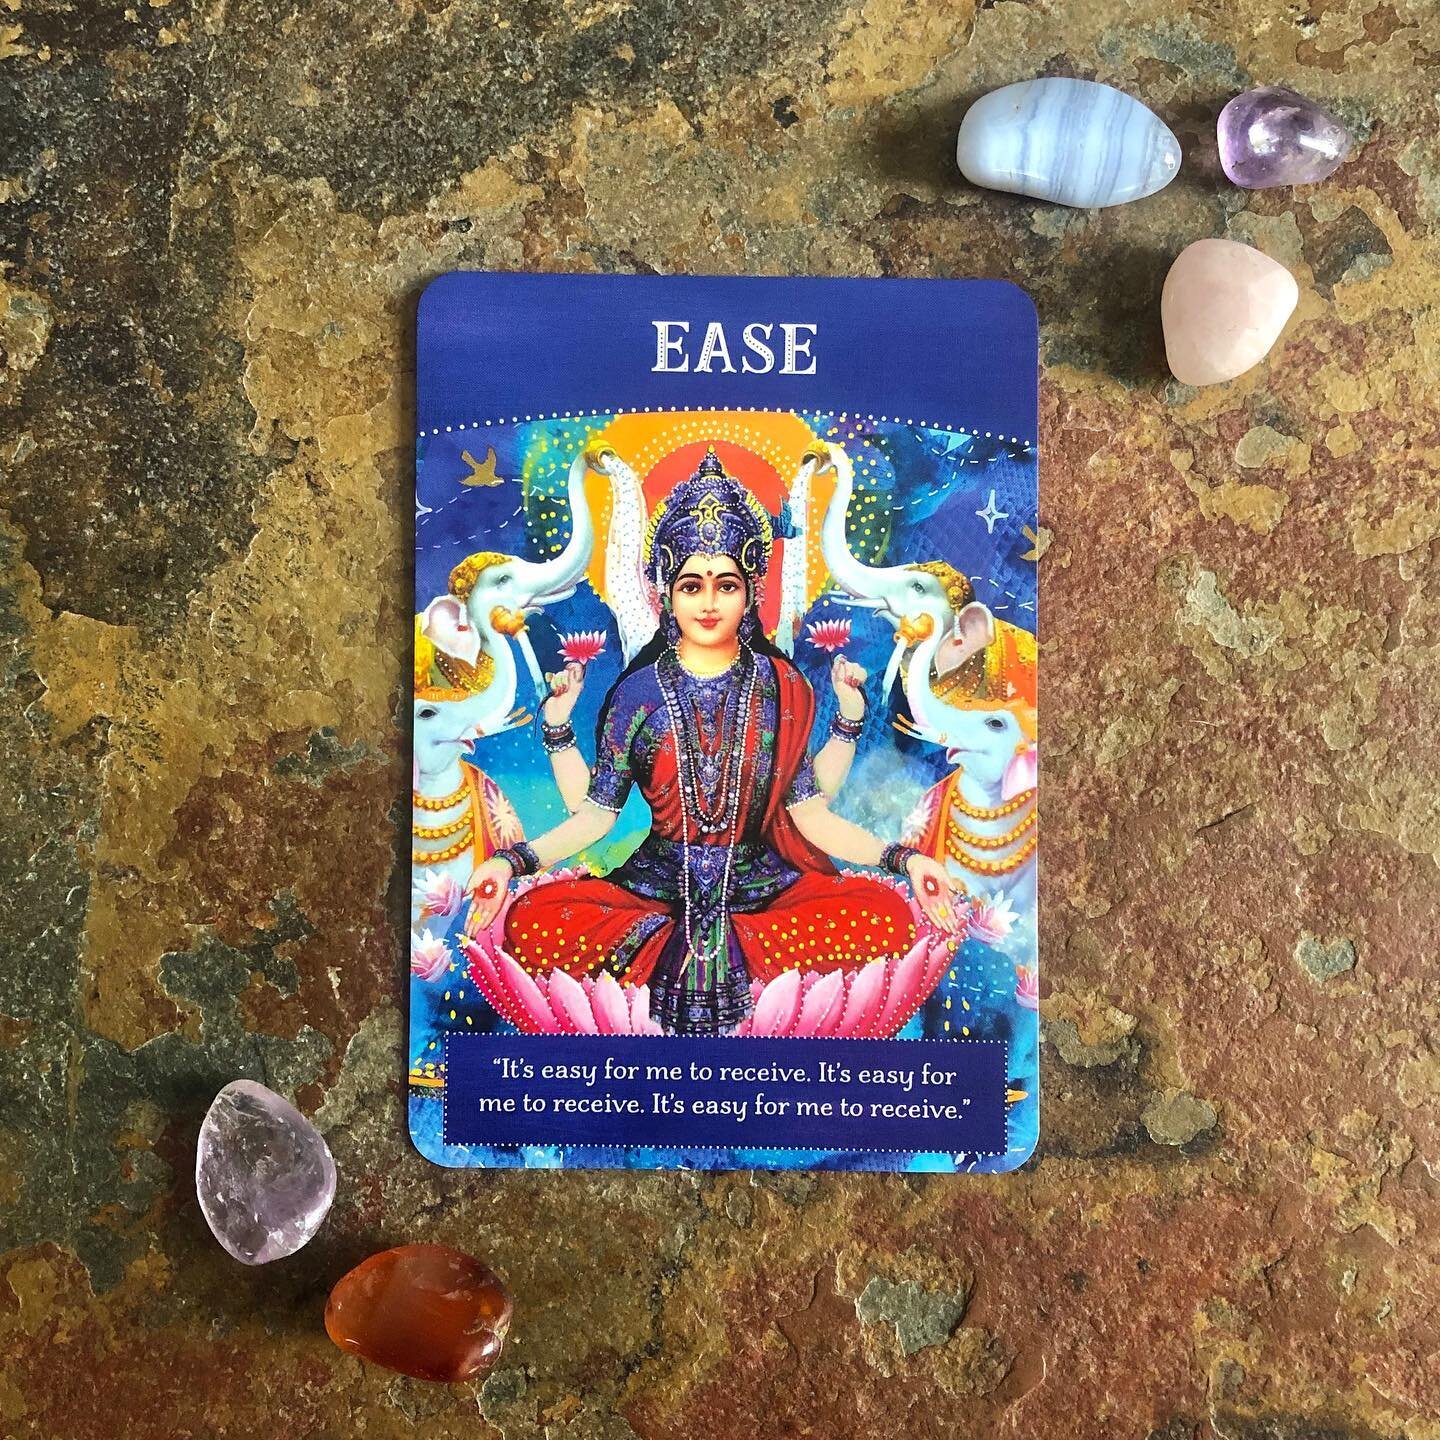 &ldquo;It&rsquo;s easy for me to receive. It&rsquo;s easy for me to receive. It&rsquo;s easy for me to receive.&rdquo;
(Tosha Silver&rsquo;s Divine Abundance Oracle Cards)

The natural law of the universe is ease, but do you find it difficult to acce